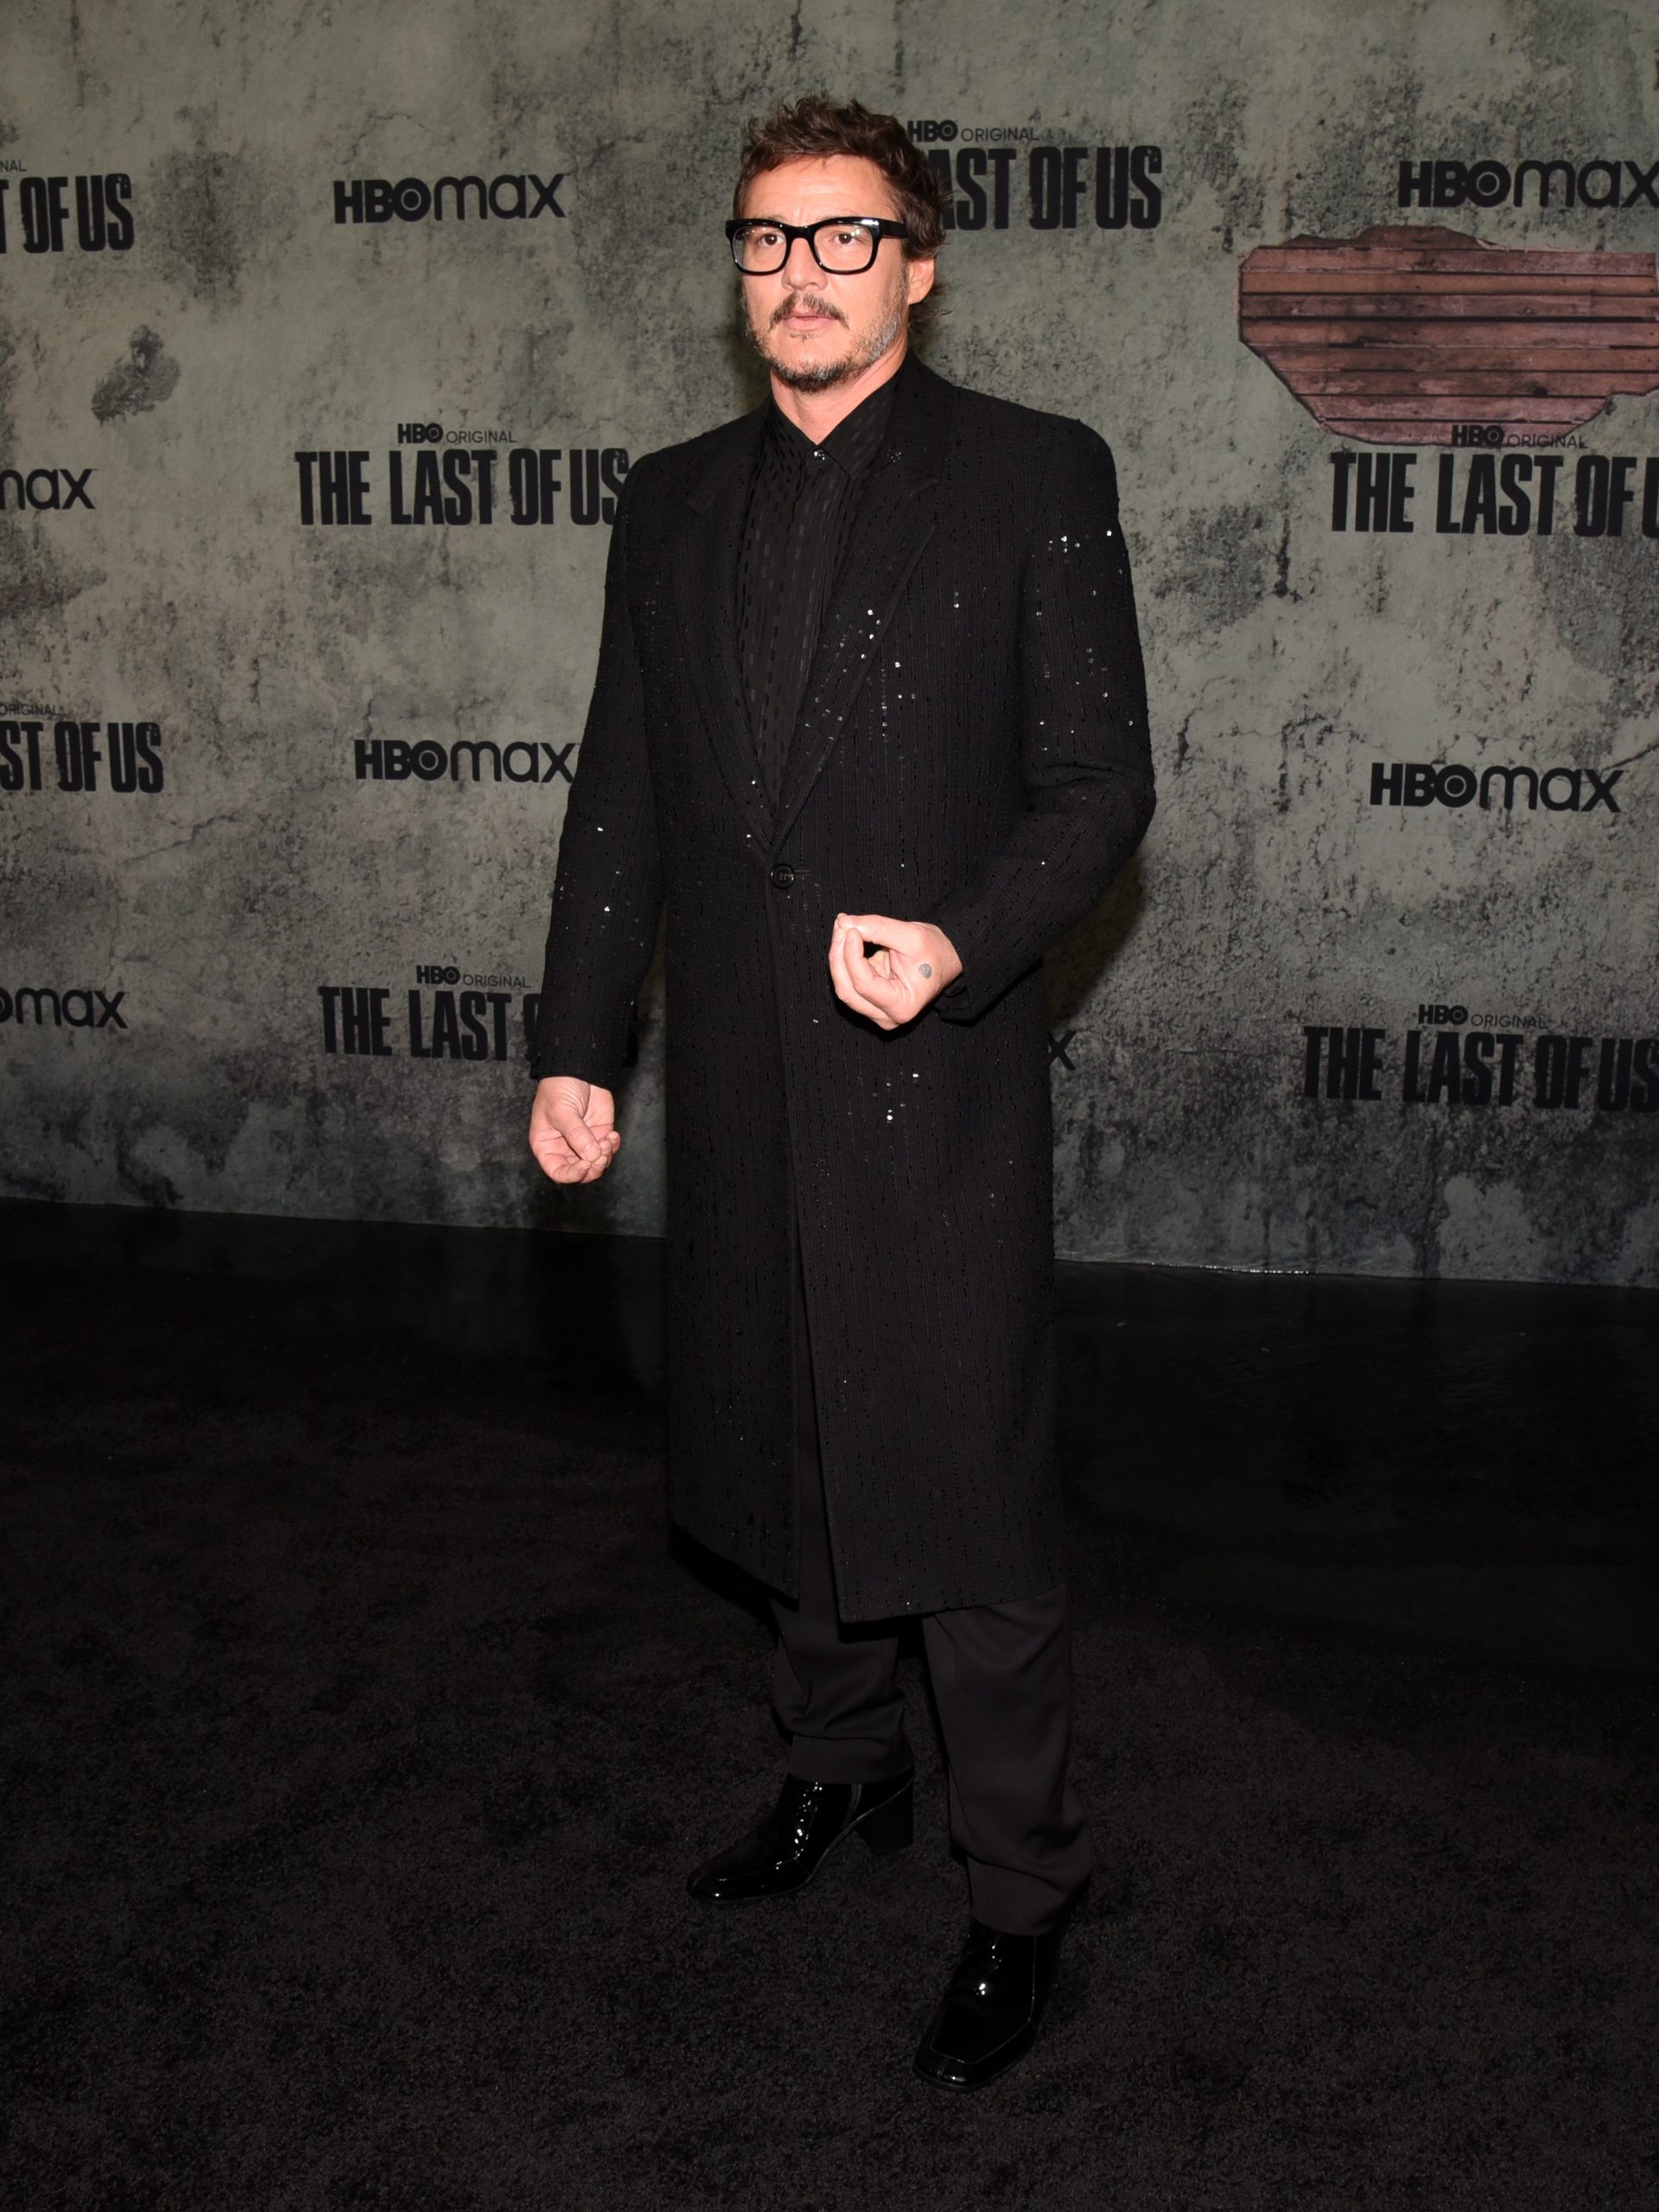 Pedro Pascal at the HBO's "The Last of Us" Los Angeles Premiere on January 09, 2023 in Los Angeles, California.